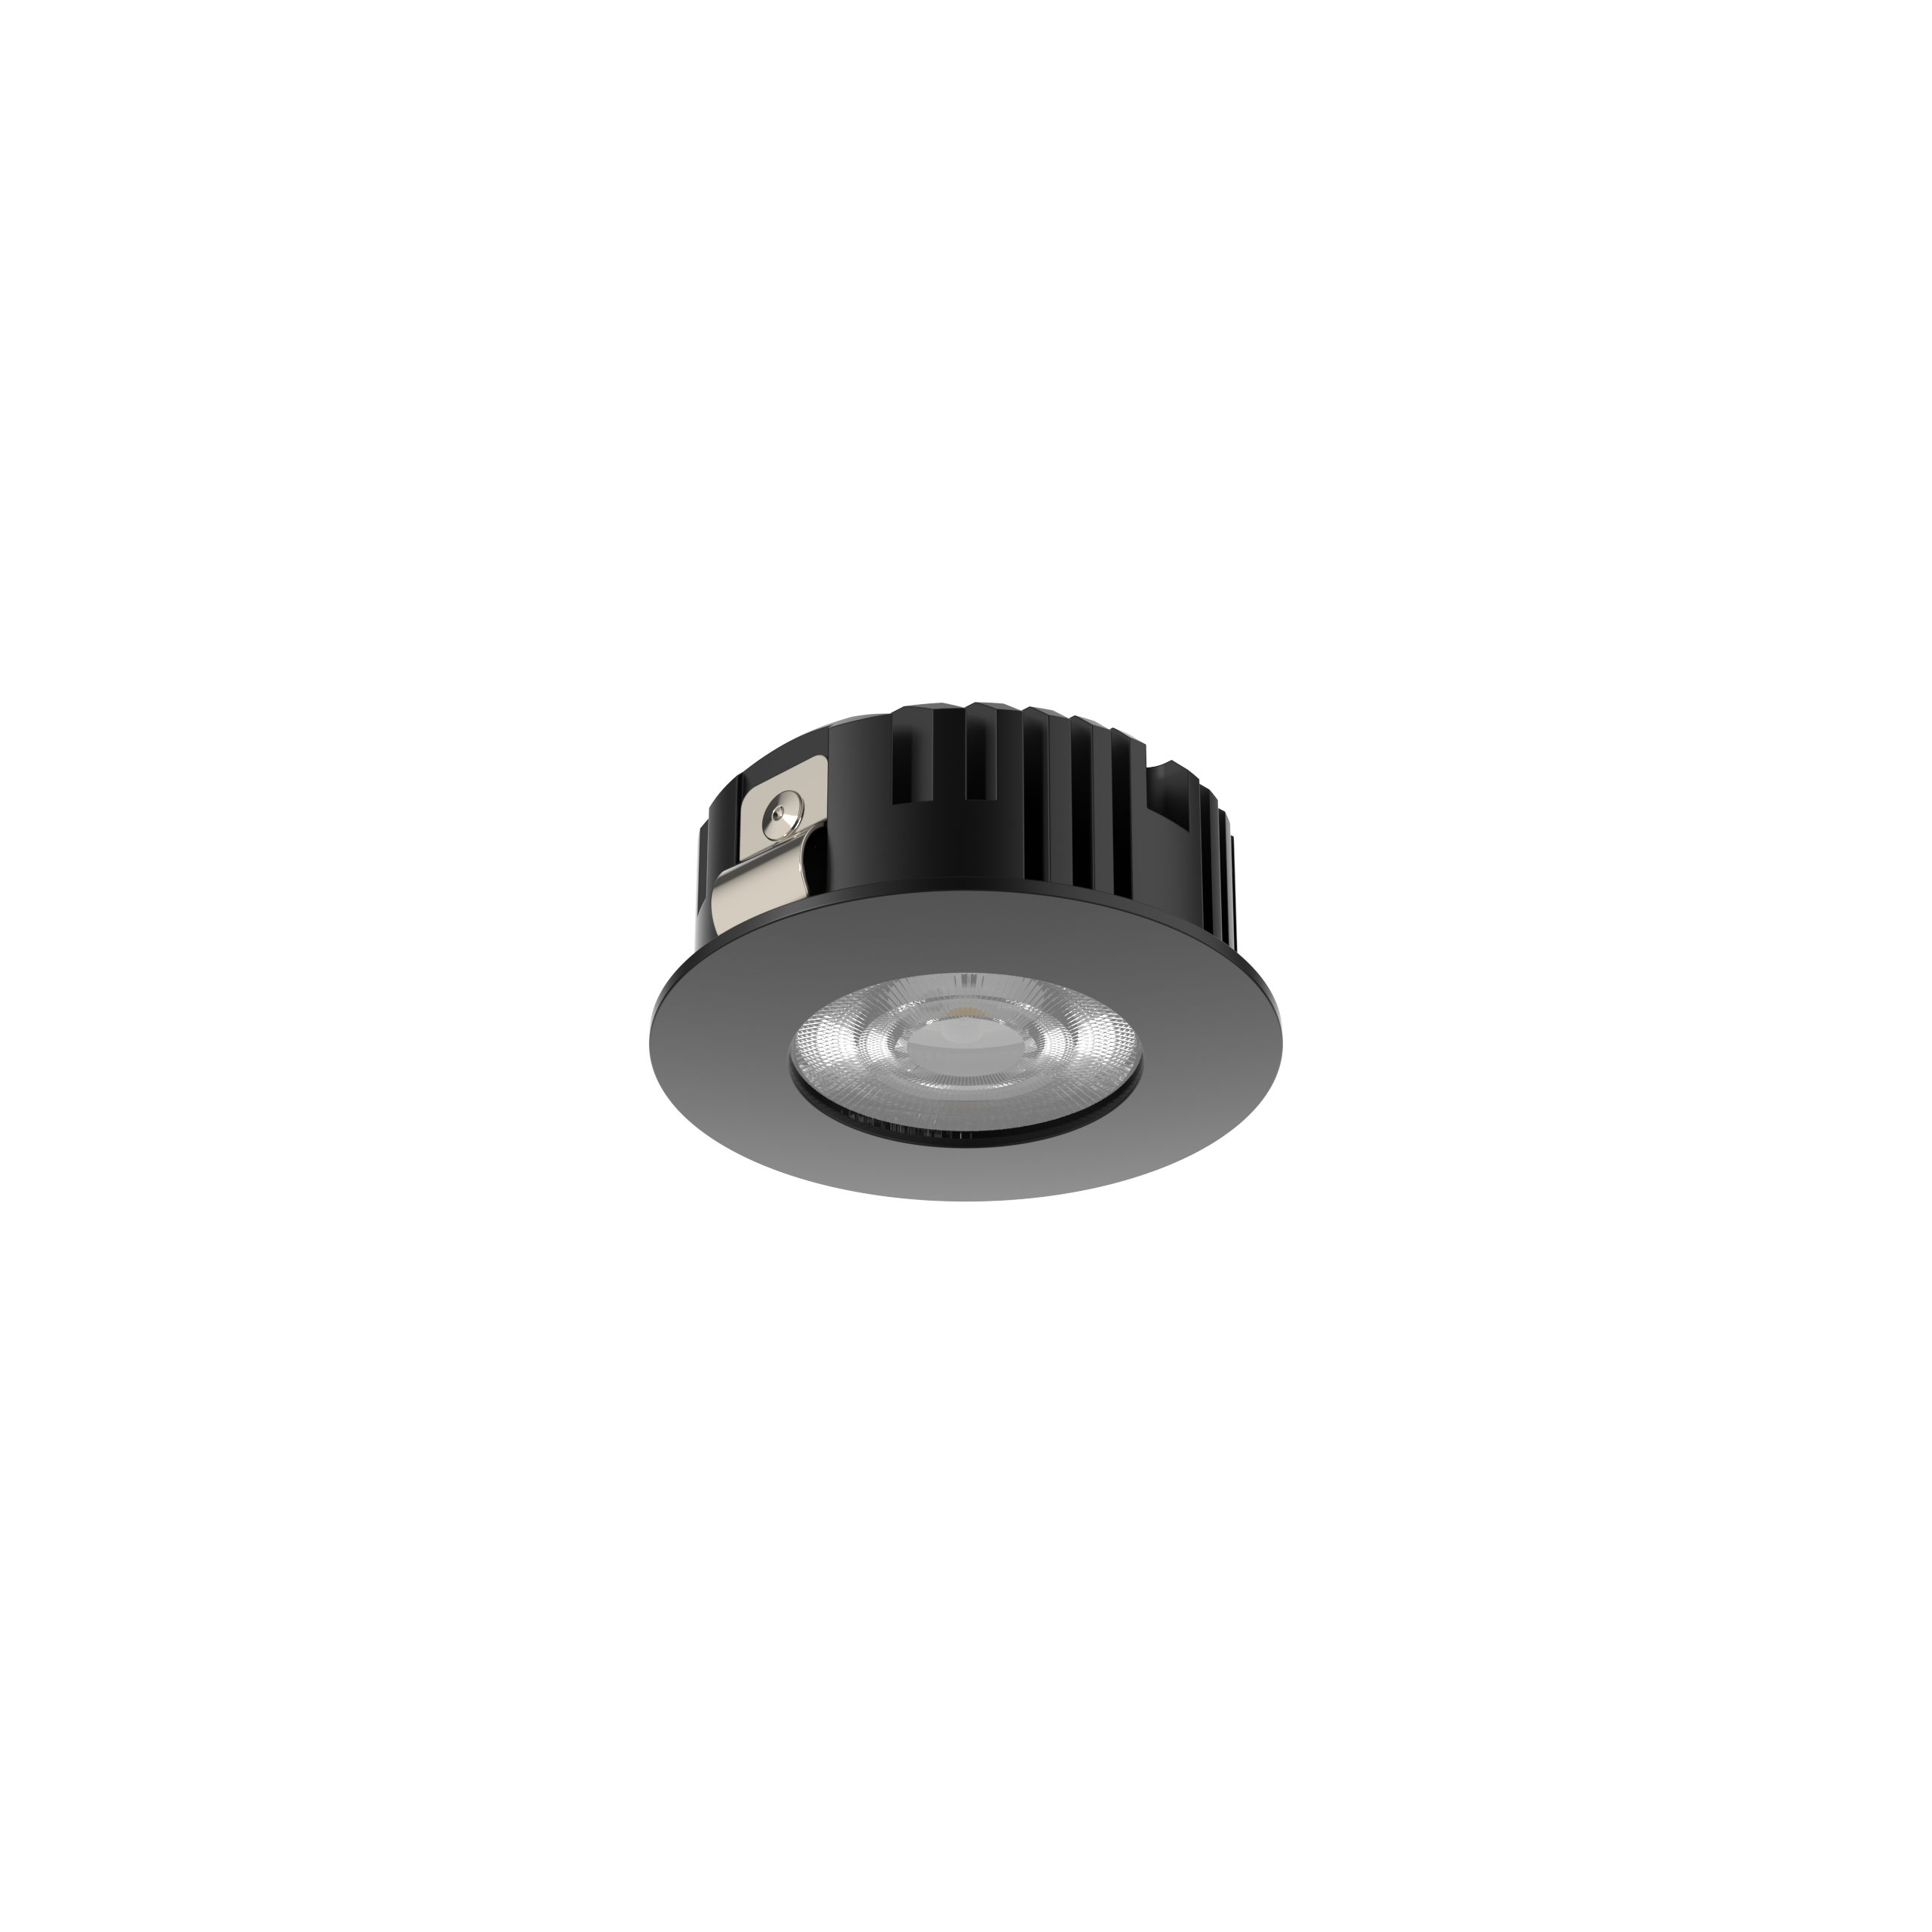 LED Recessed Down Light 2